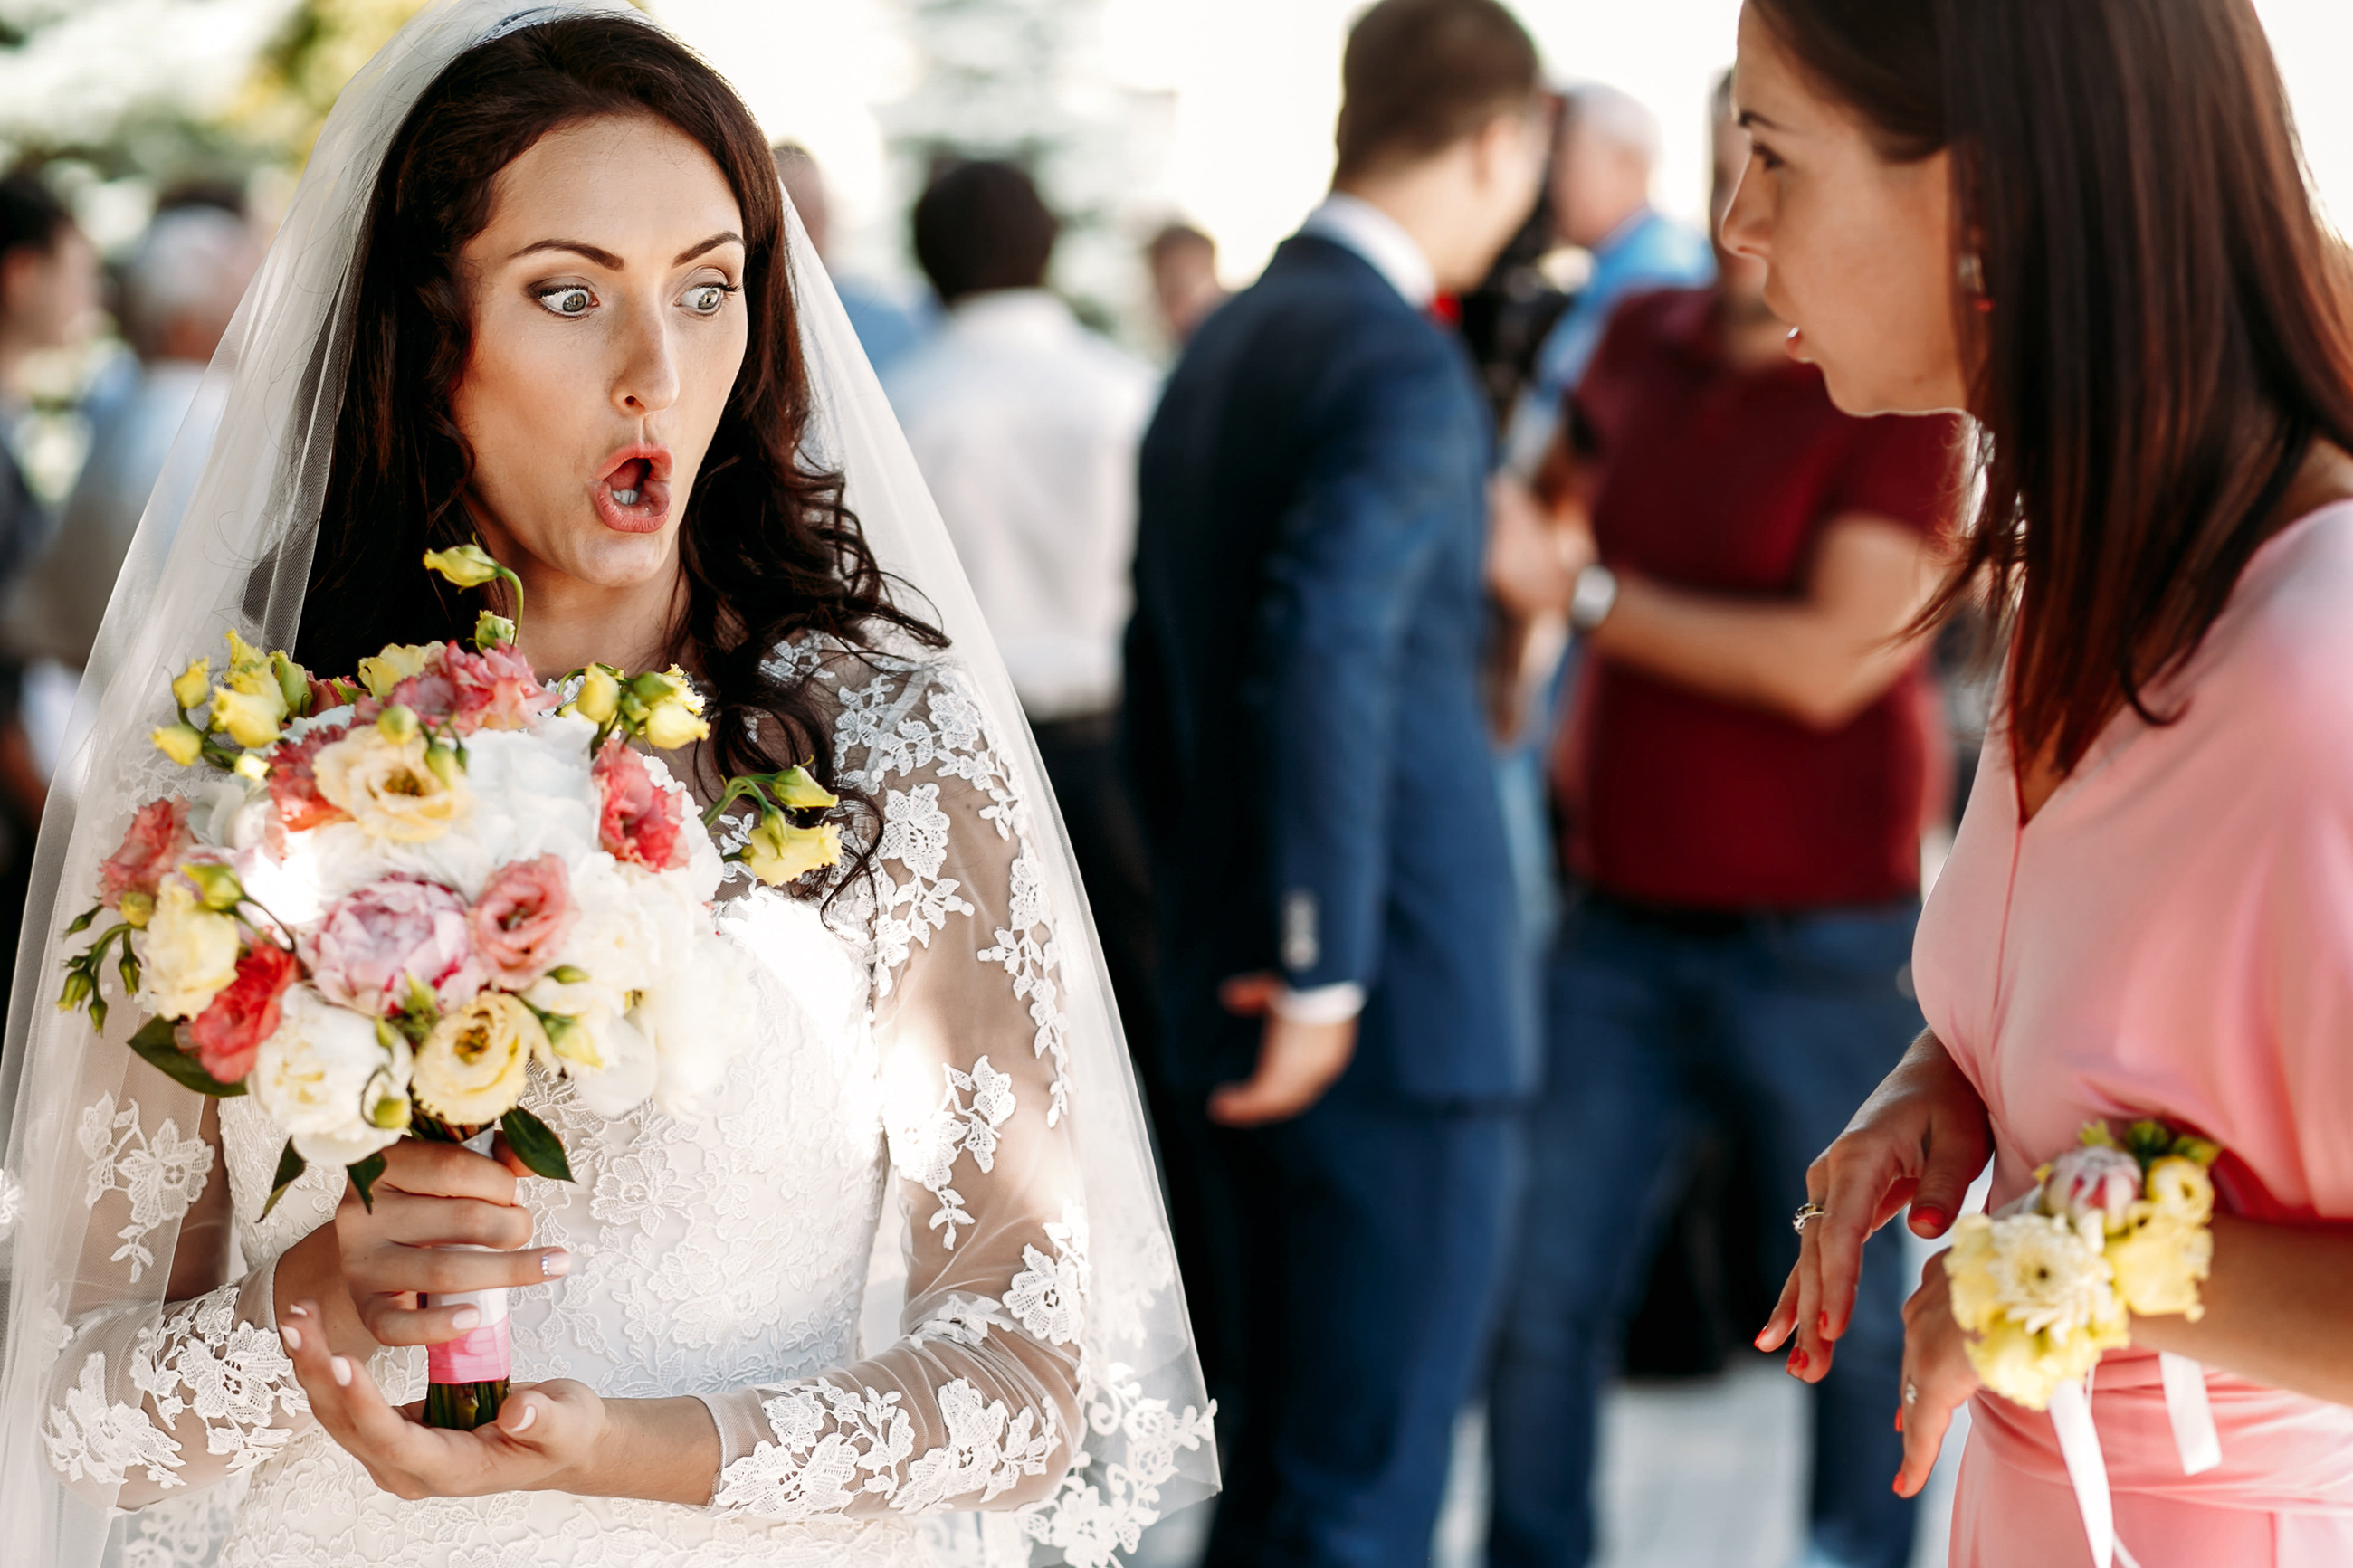 A bride talks to someone another woman at her wedding | Source: Shutterstock